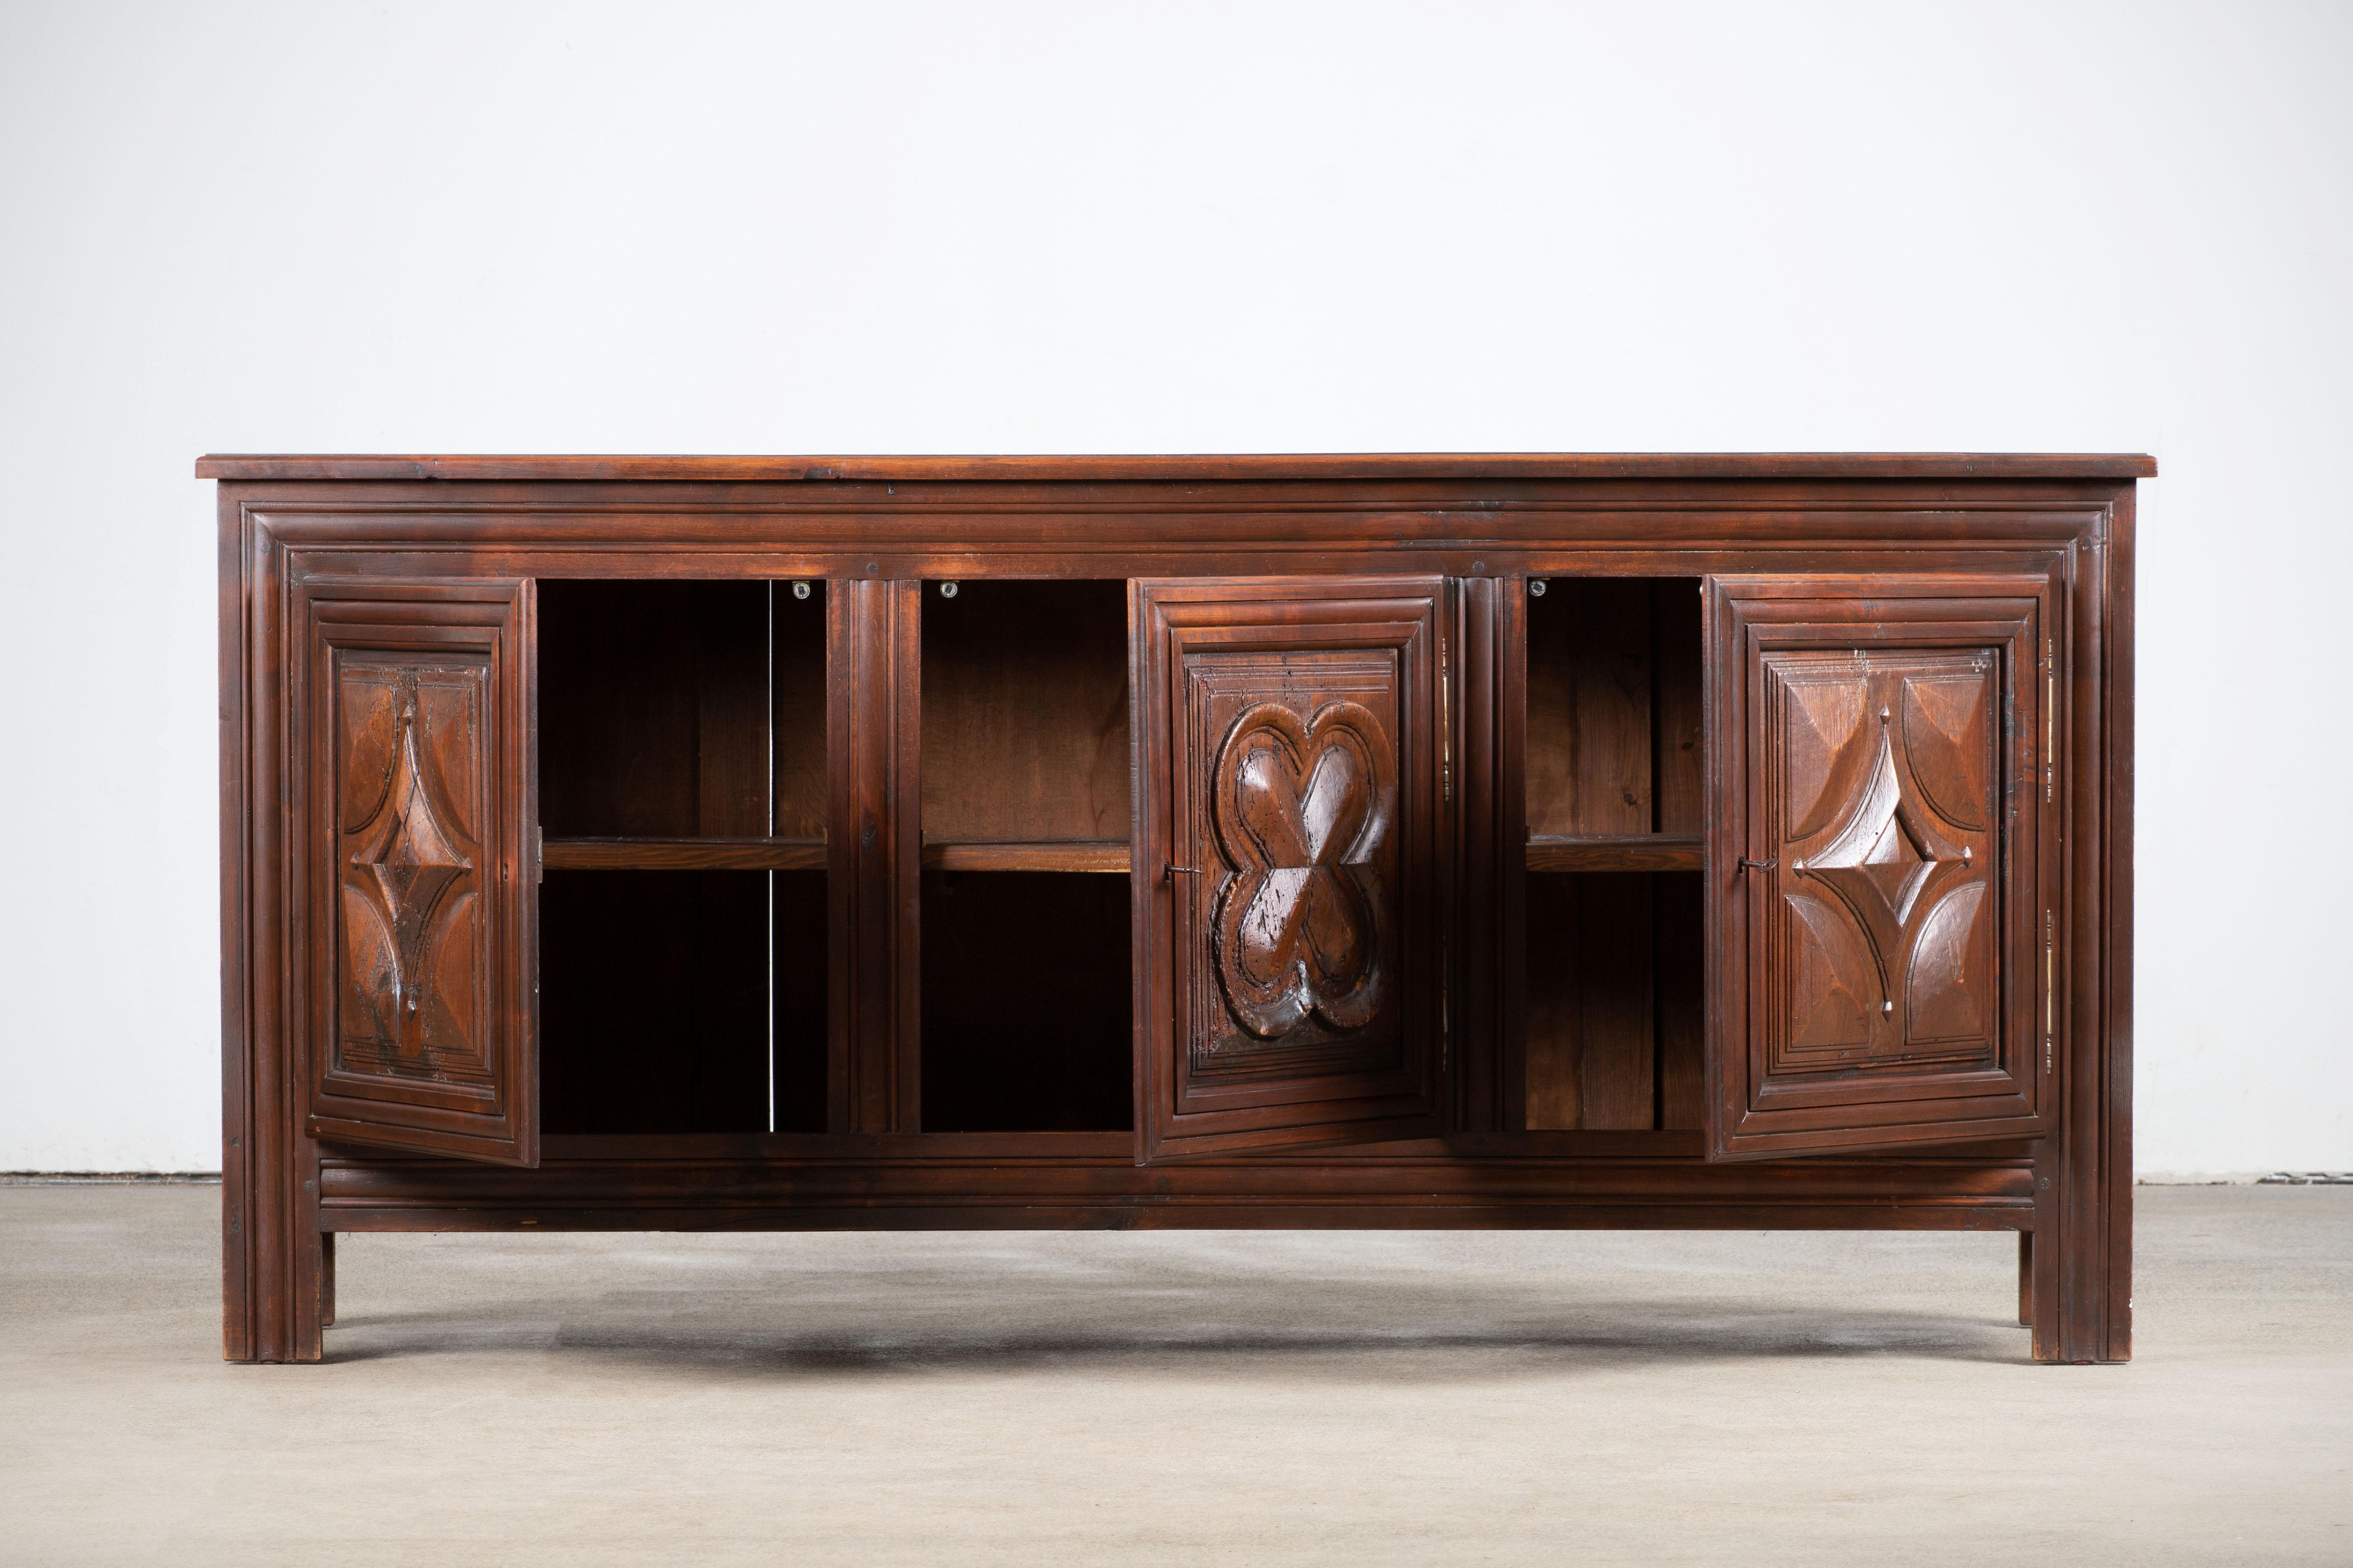 Sideboard, Mahogani, France, 1900.

The sideboard is in excellent original condition, it features a nice patina, with minor wear consistent with age and use.
 